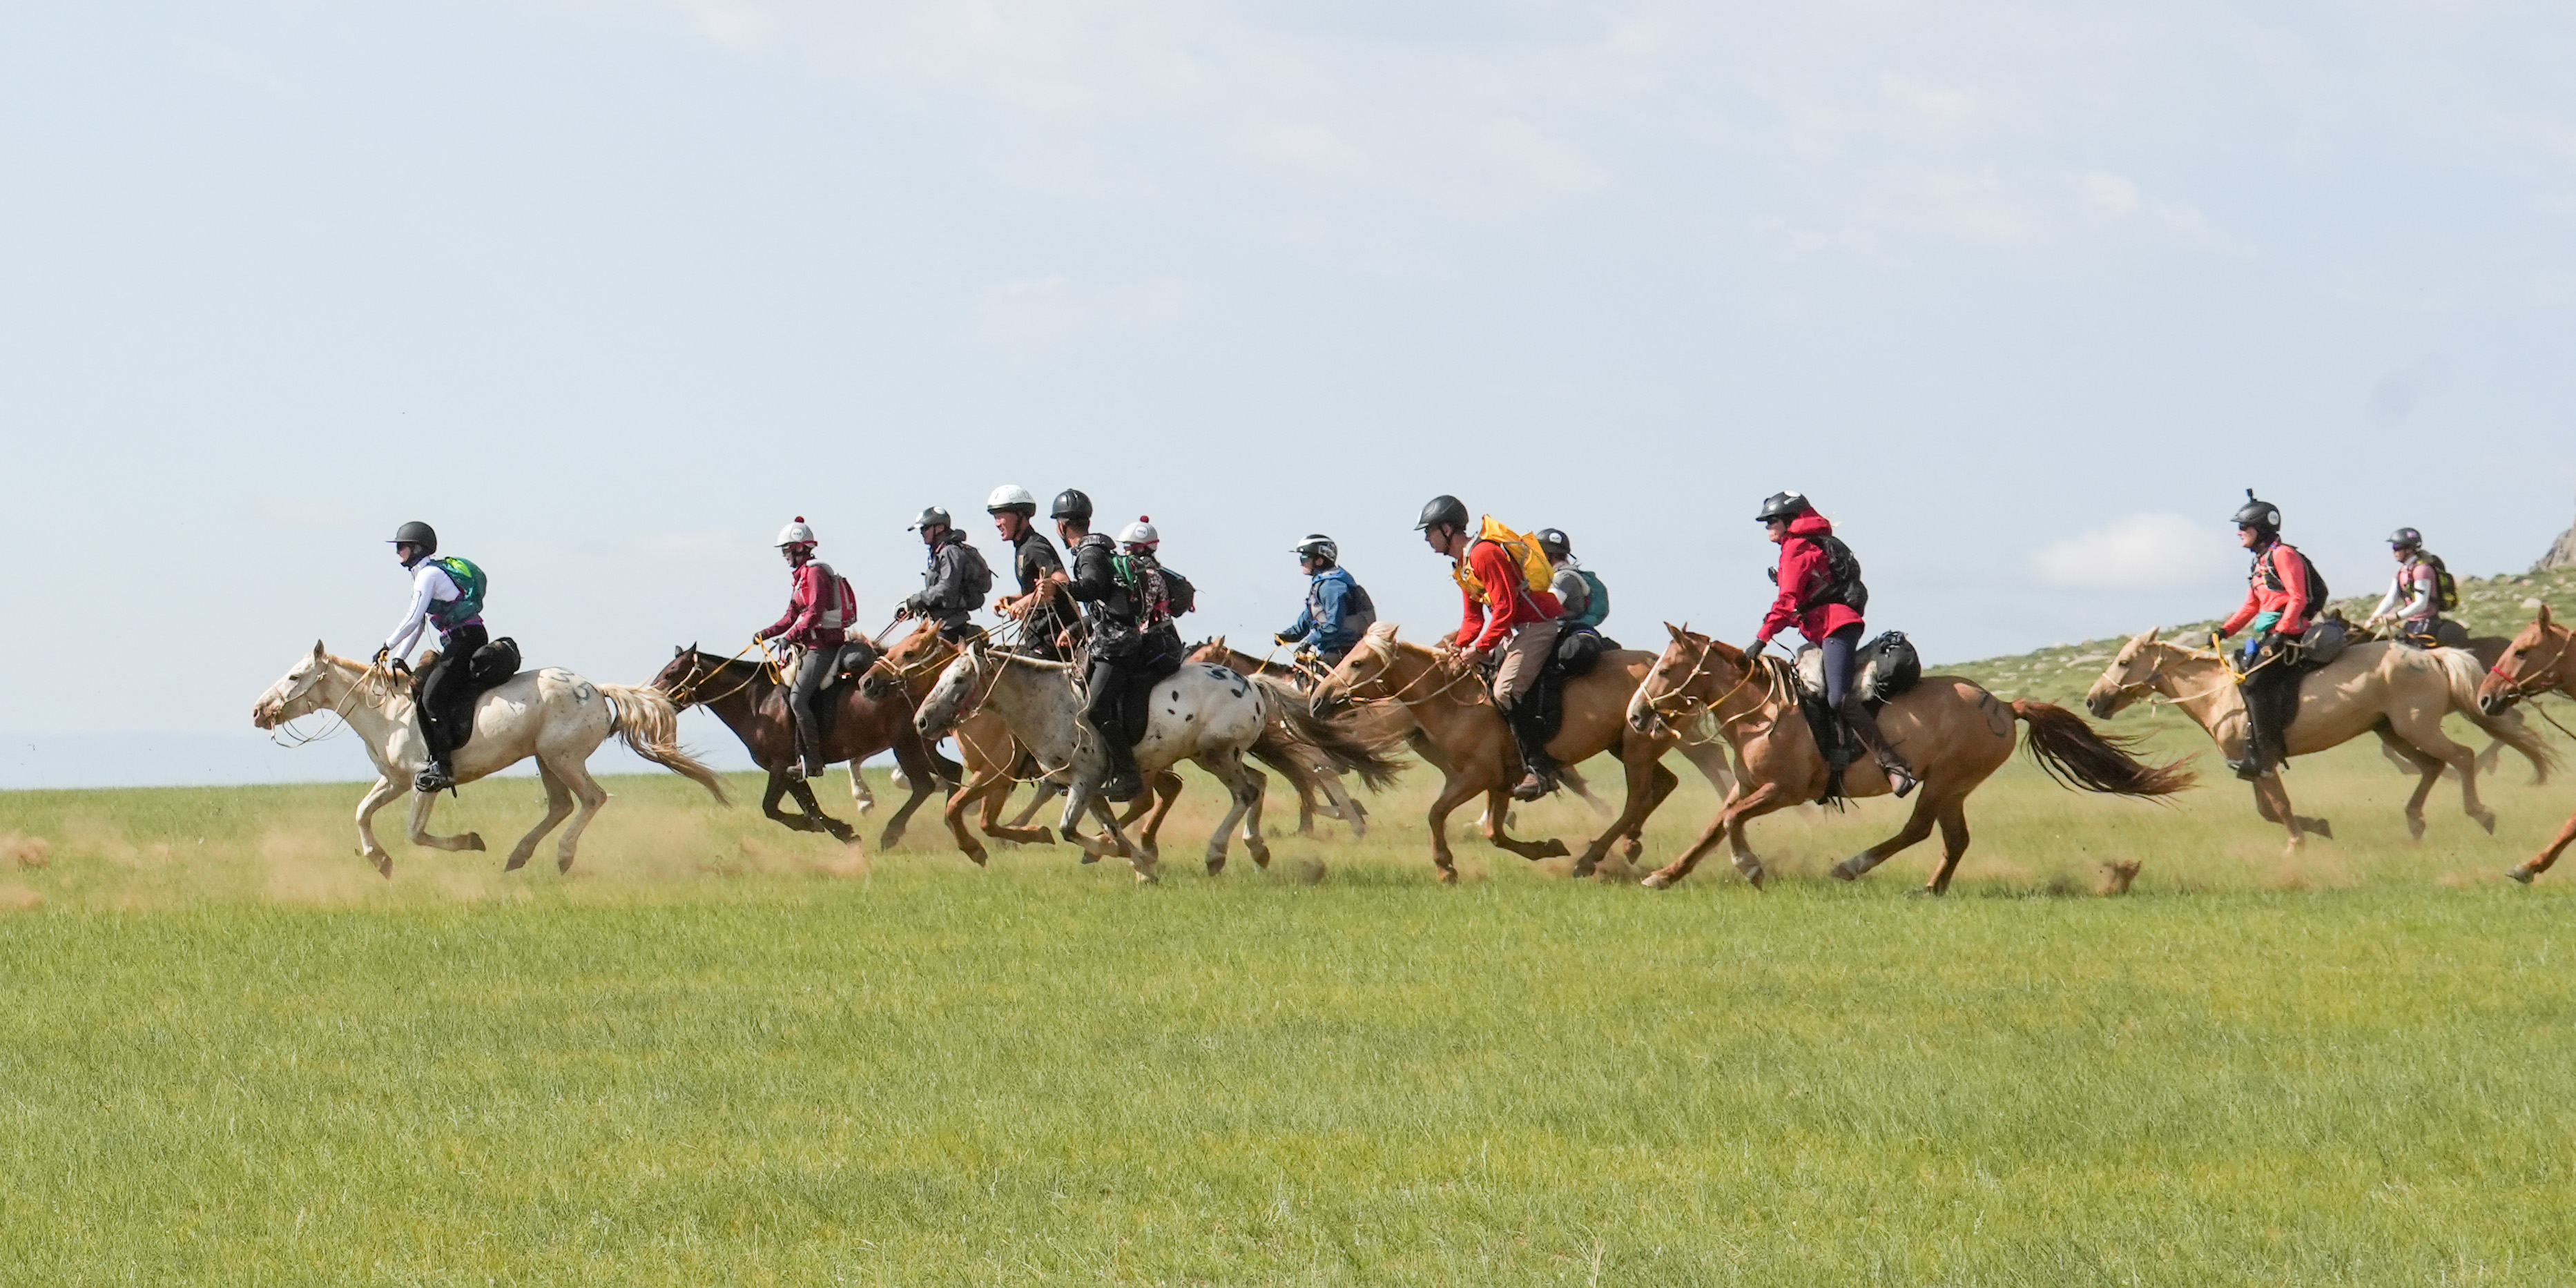 Jessica Di Pasquale followed a recreated version of the horse messenger system developed by Genghis Khan in 1224 for 1000km.